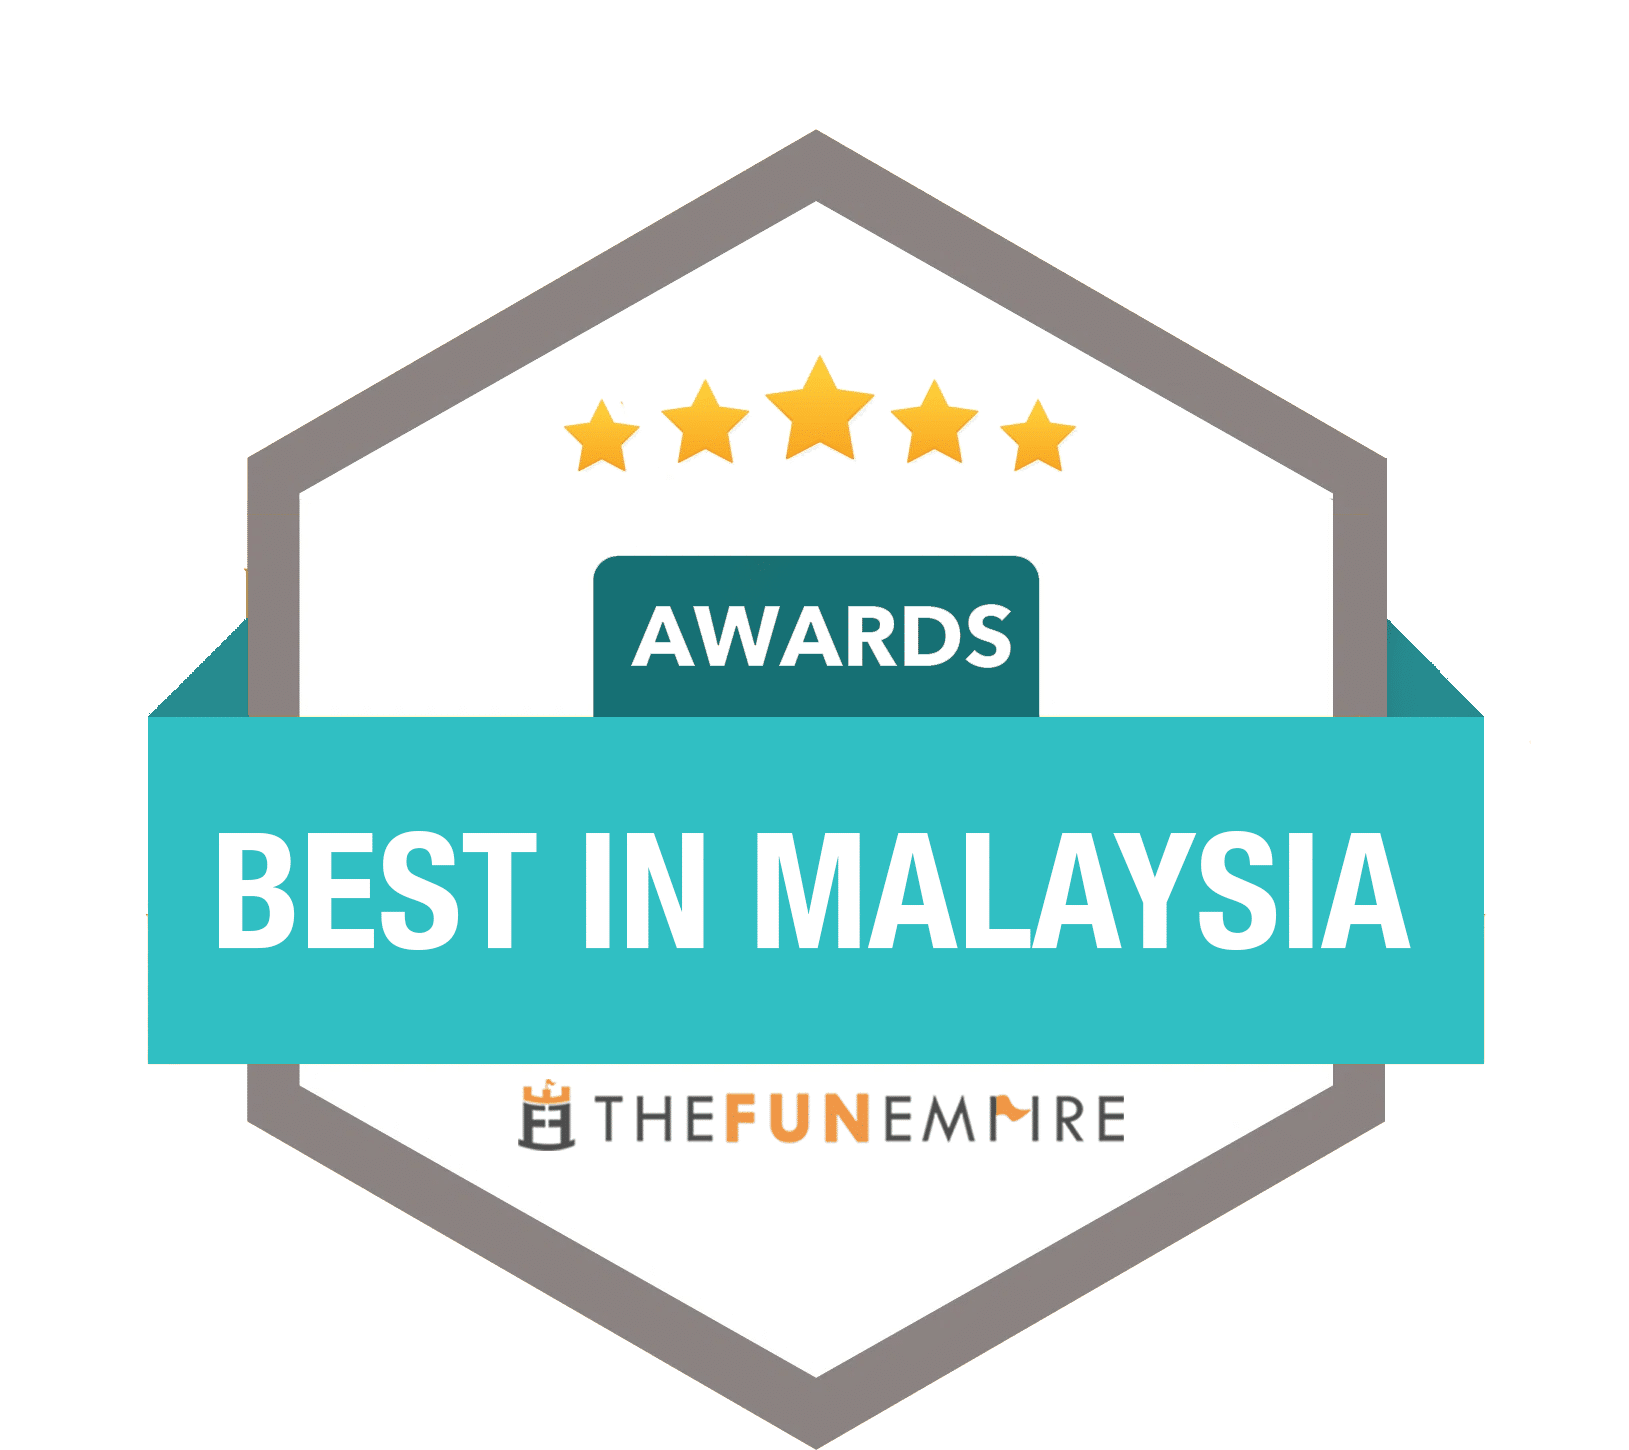 Best of Malaysia 2021 Coworking Space Headspace SS15